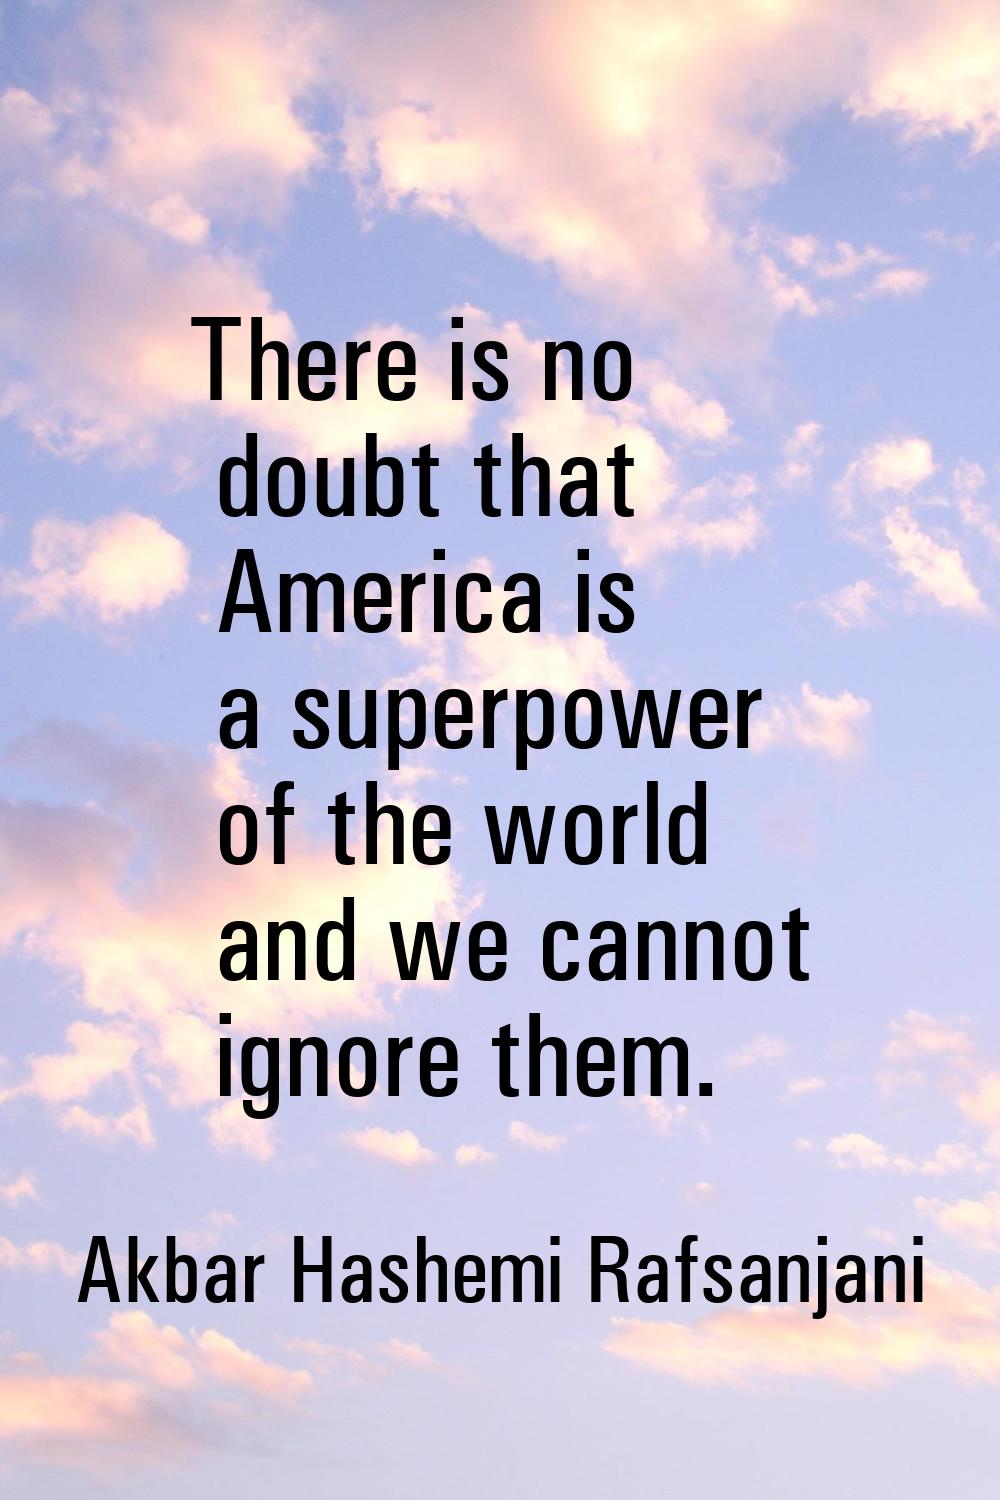 There is no doubt that America is a superpower of the world and we cannot ignore them.